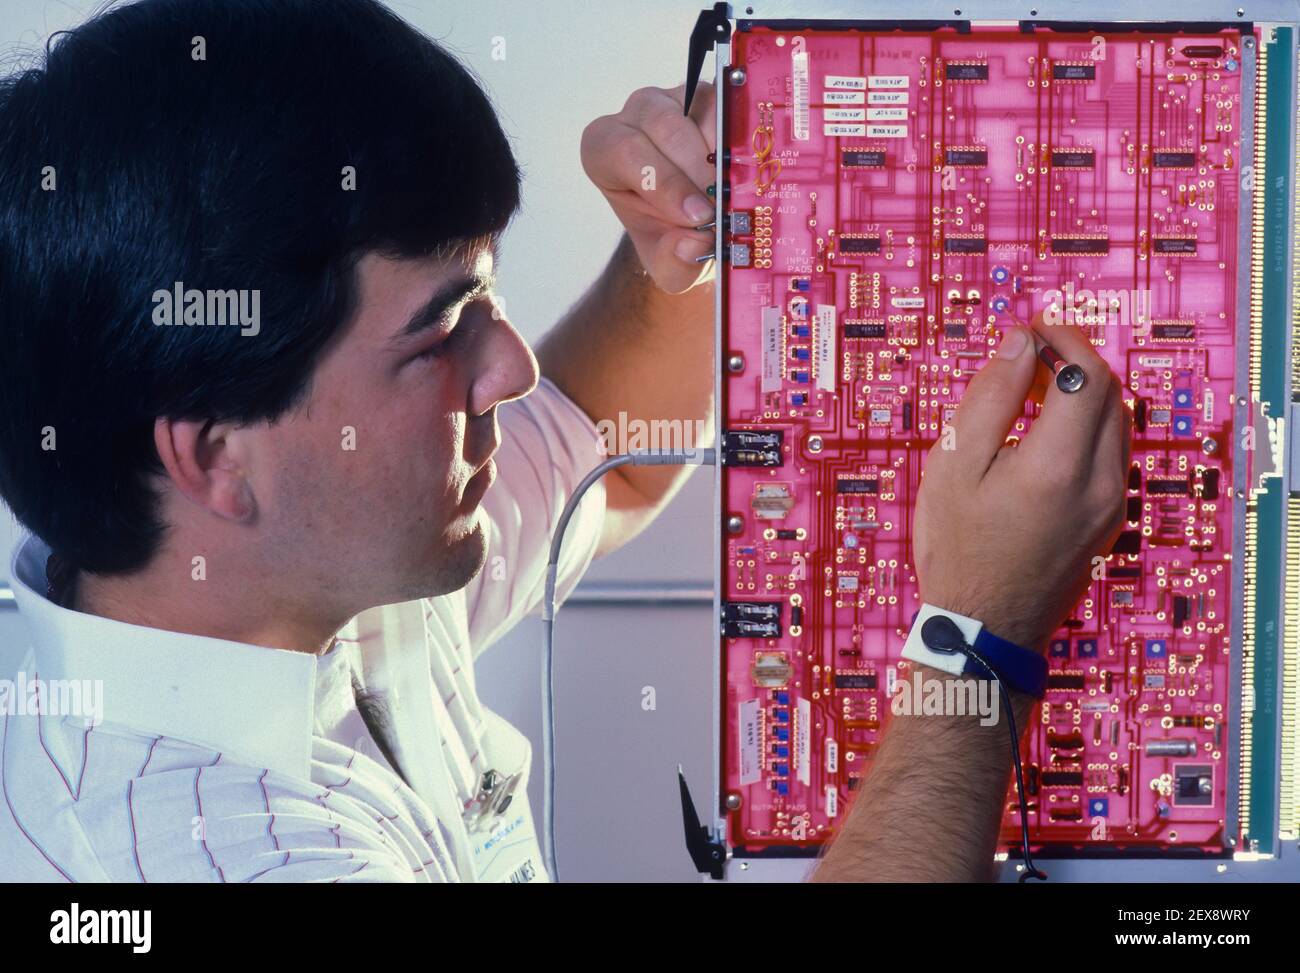 SYRACUSE, NEW YORK, USA - Cell phone technician works on circuit board, telecommunications equipment, while wearing static electricity grounding wrist strap. Stock Photo